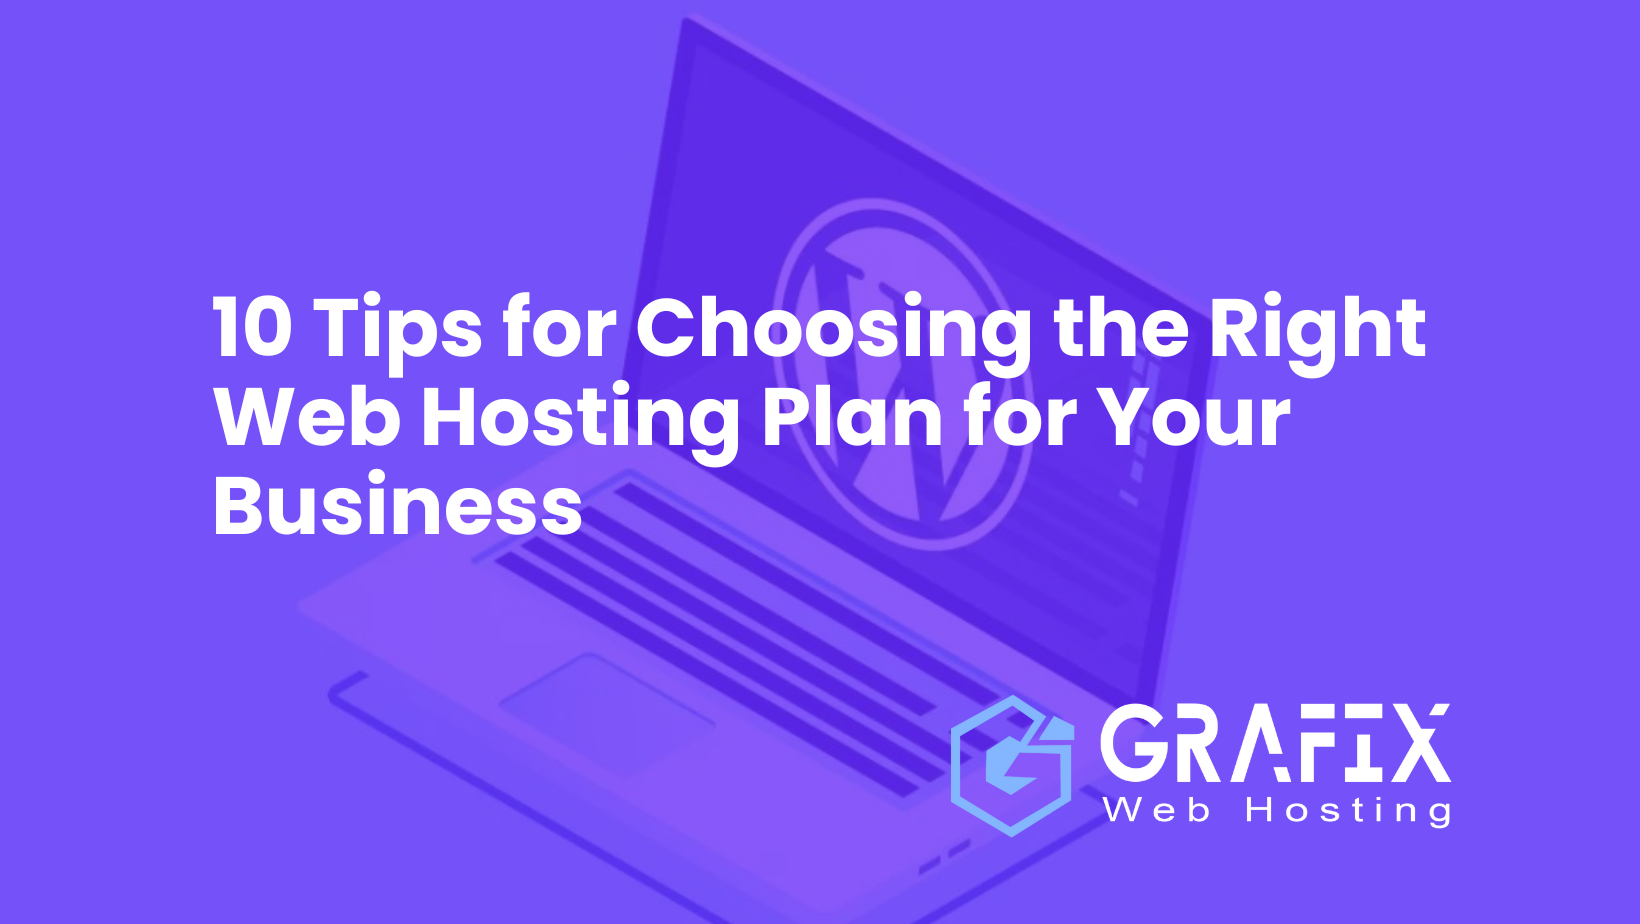 How-to-Choose-the-Best-Web-Hosting-Service-for-Your-Business